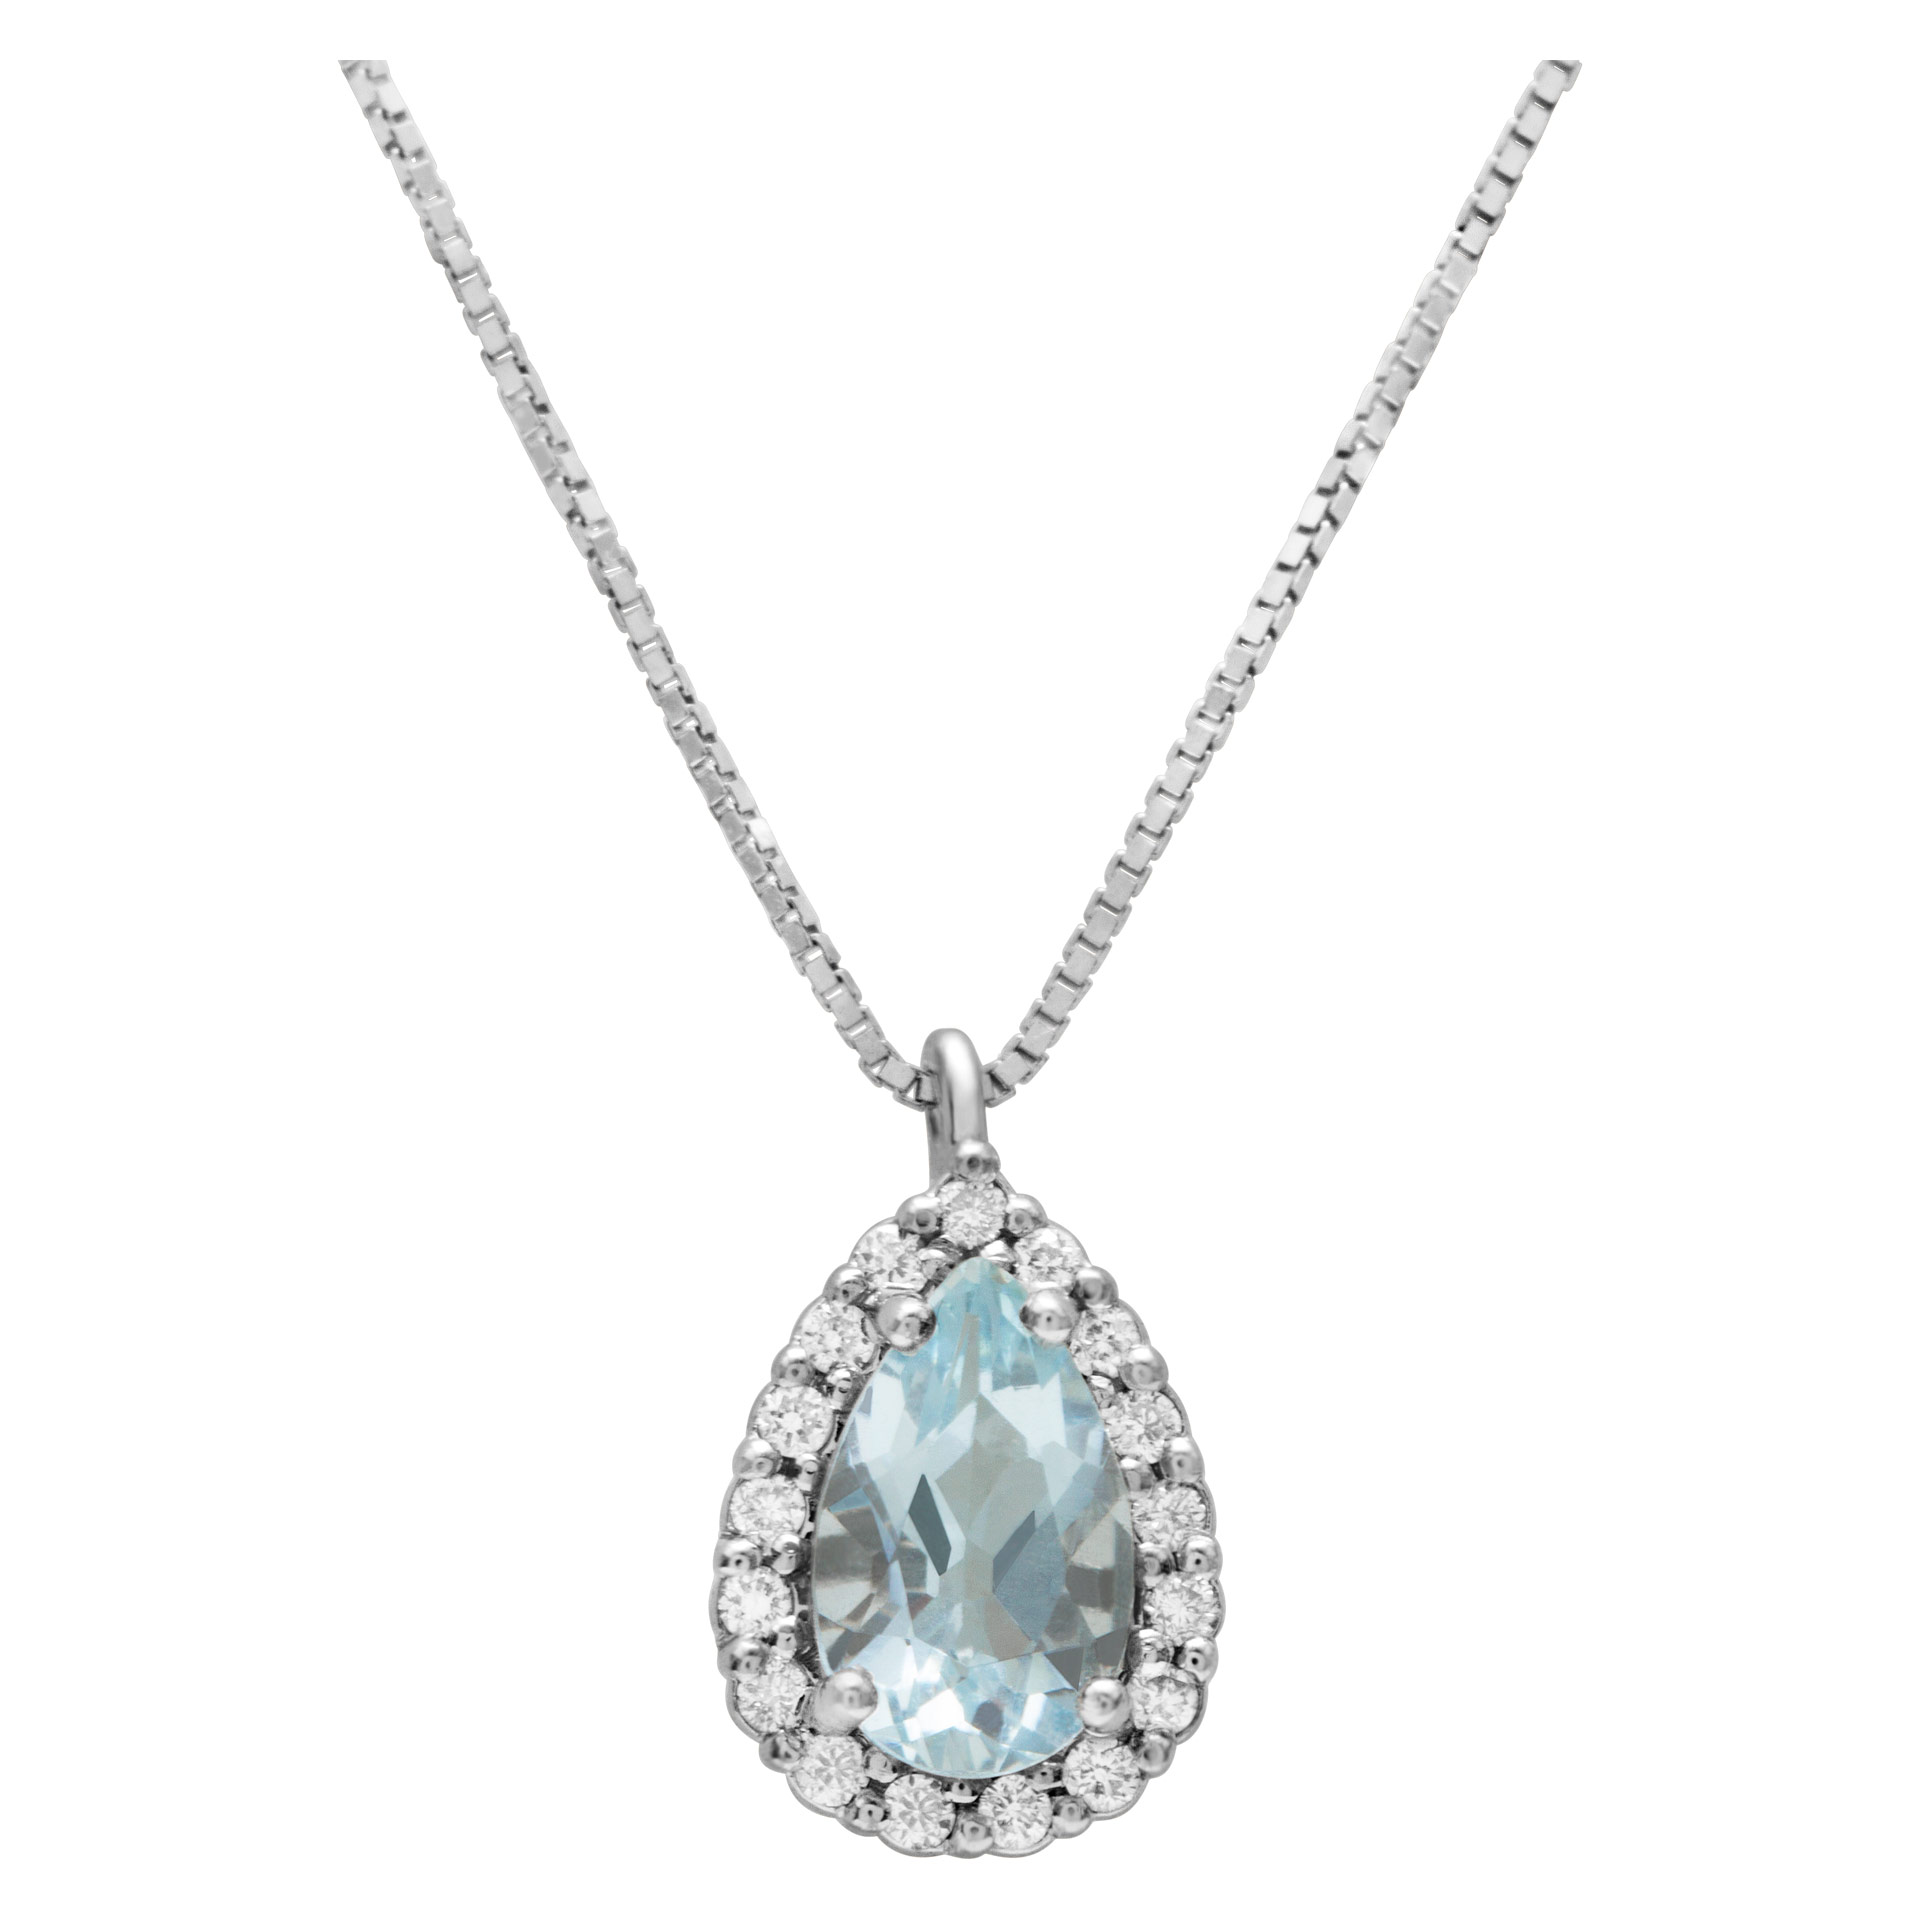 Aquamarine cute little pendant with 0.13 cts in diamonds in 18k white gold